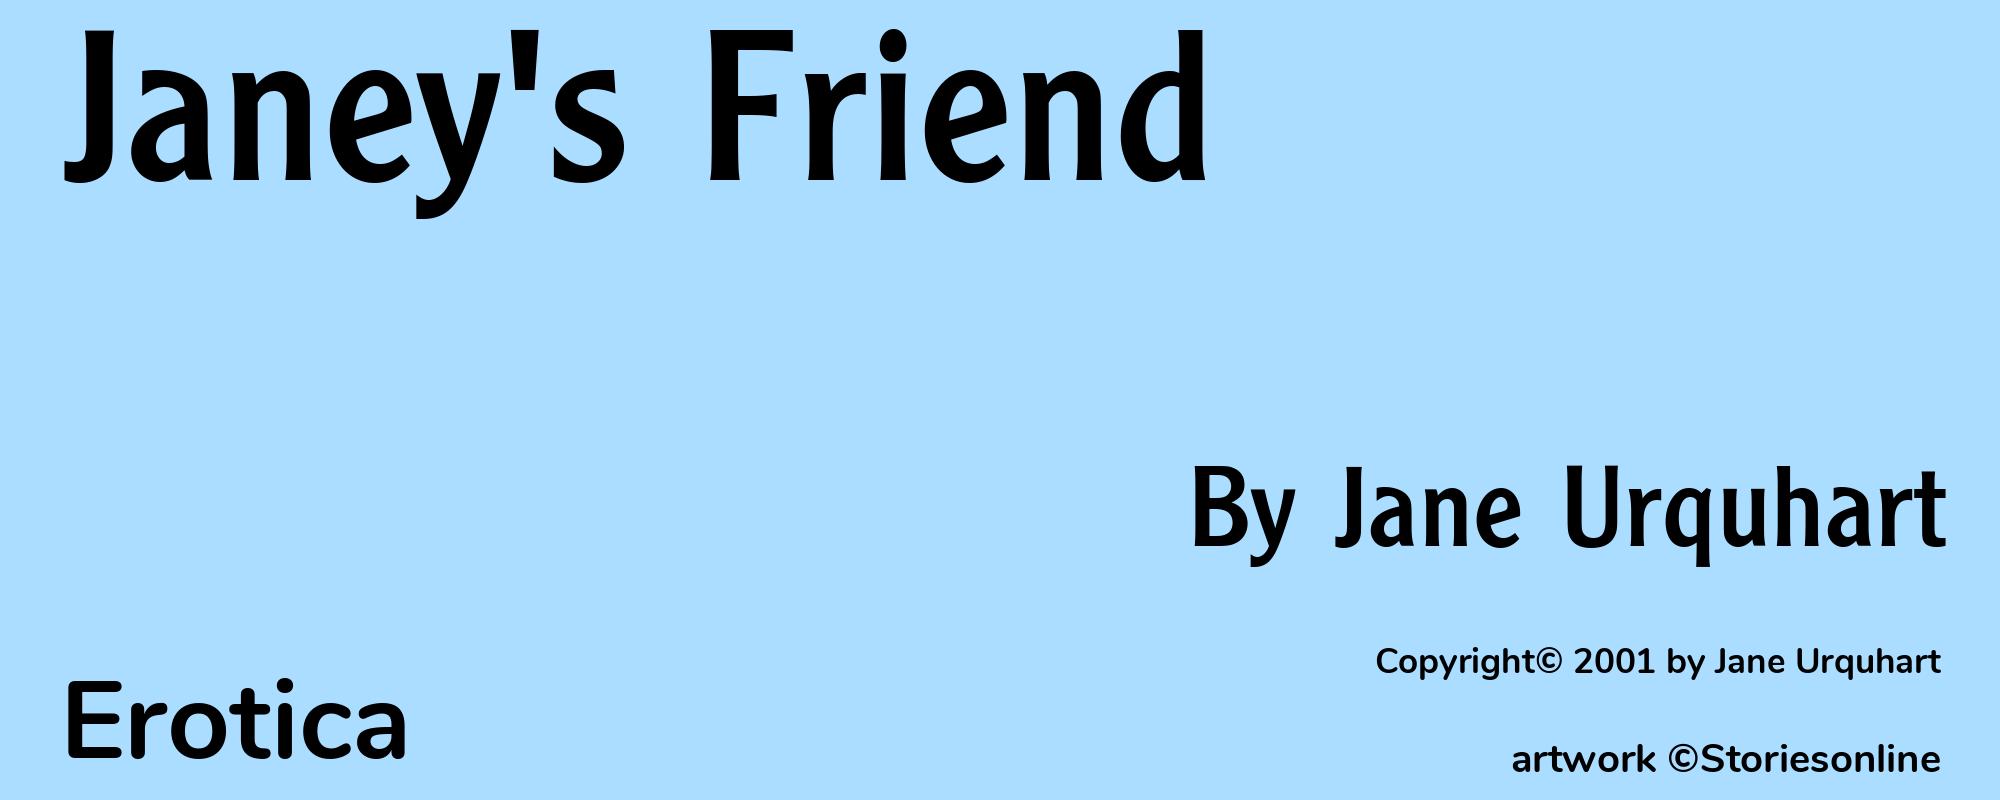 Janey's Friend - Cover